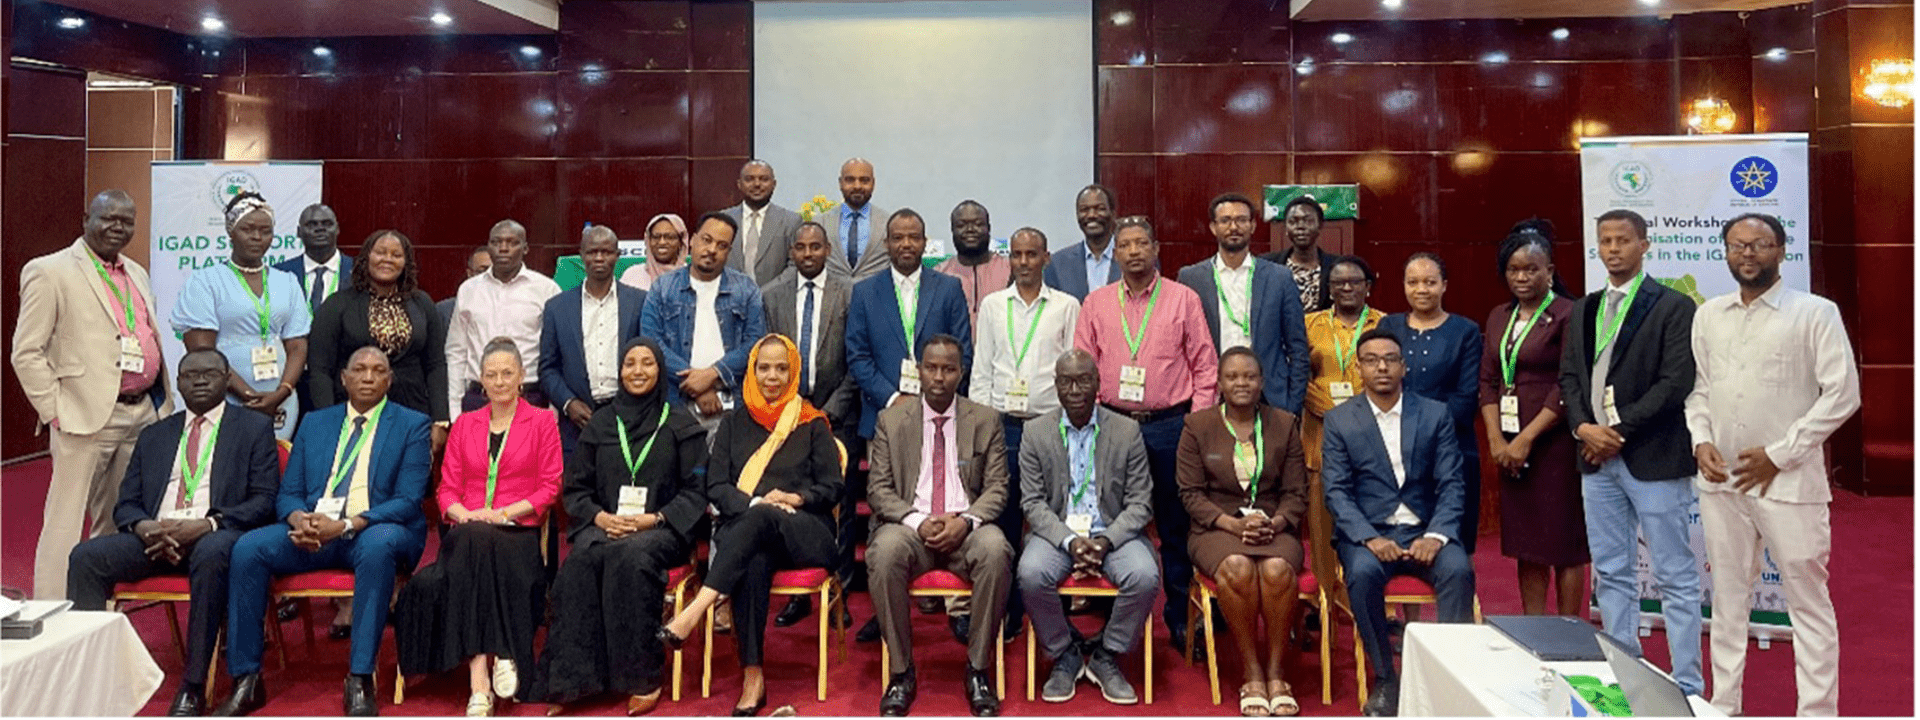 Harmonisation and Improvement of Production and Utilisation of Displacement Statistics in the IGAD Region, Technical Working Sub-Group on Displacement Statistics